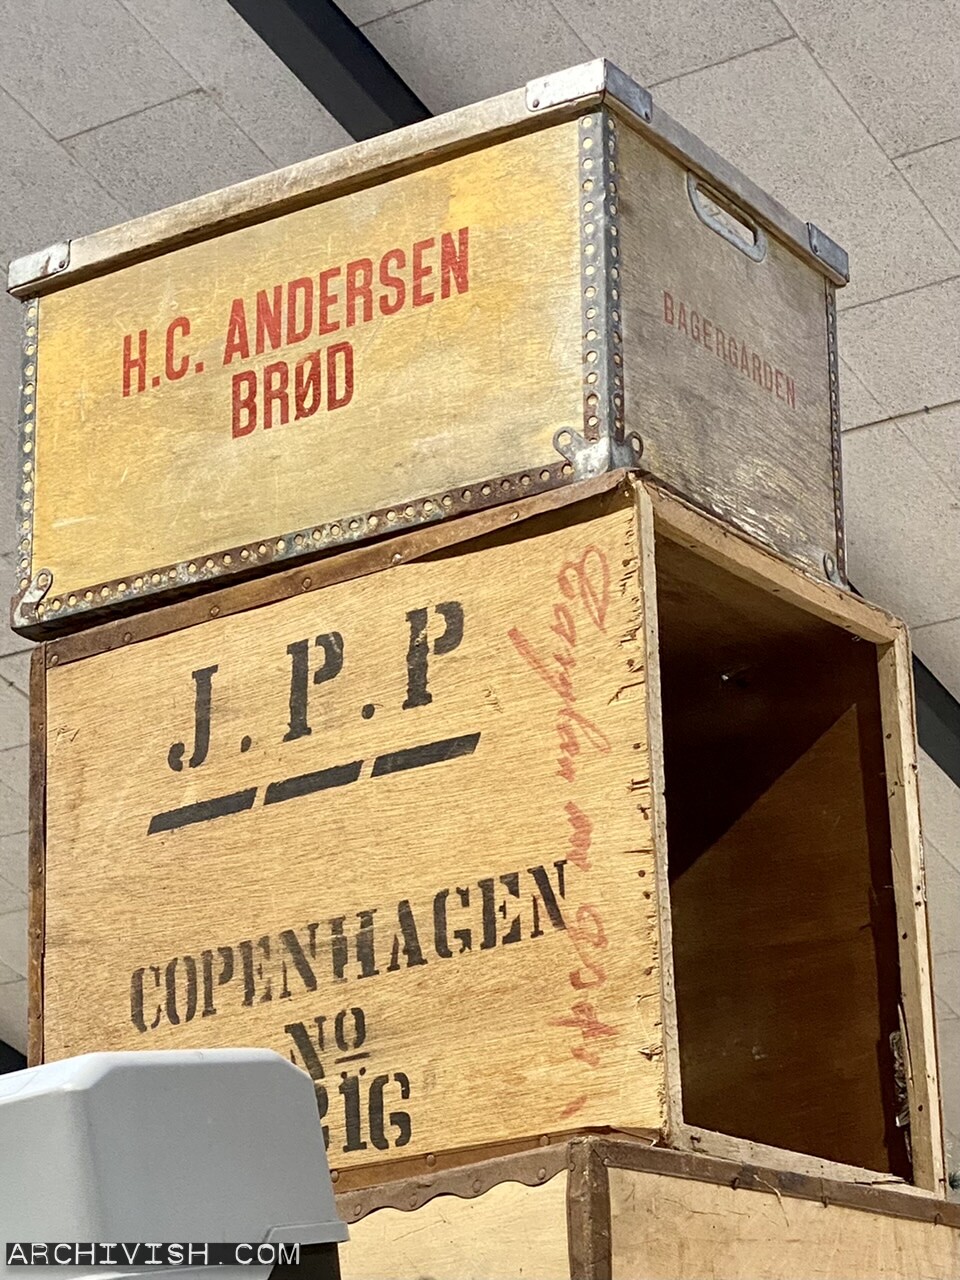 Plyfa boxes from the bakery "H. C. Andersen / Bagergården" and "J. P. P. Copenhagen"